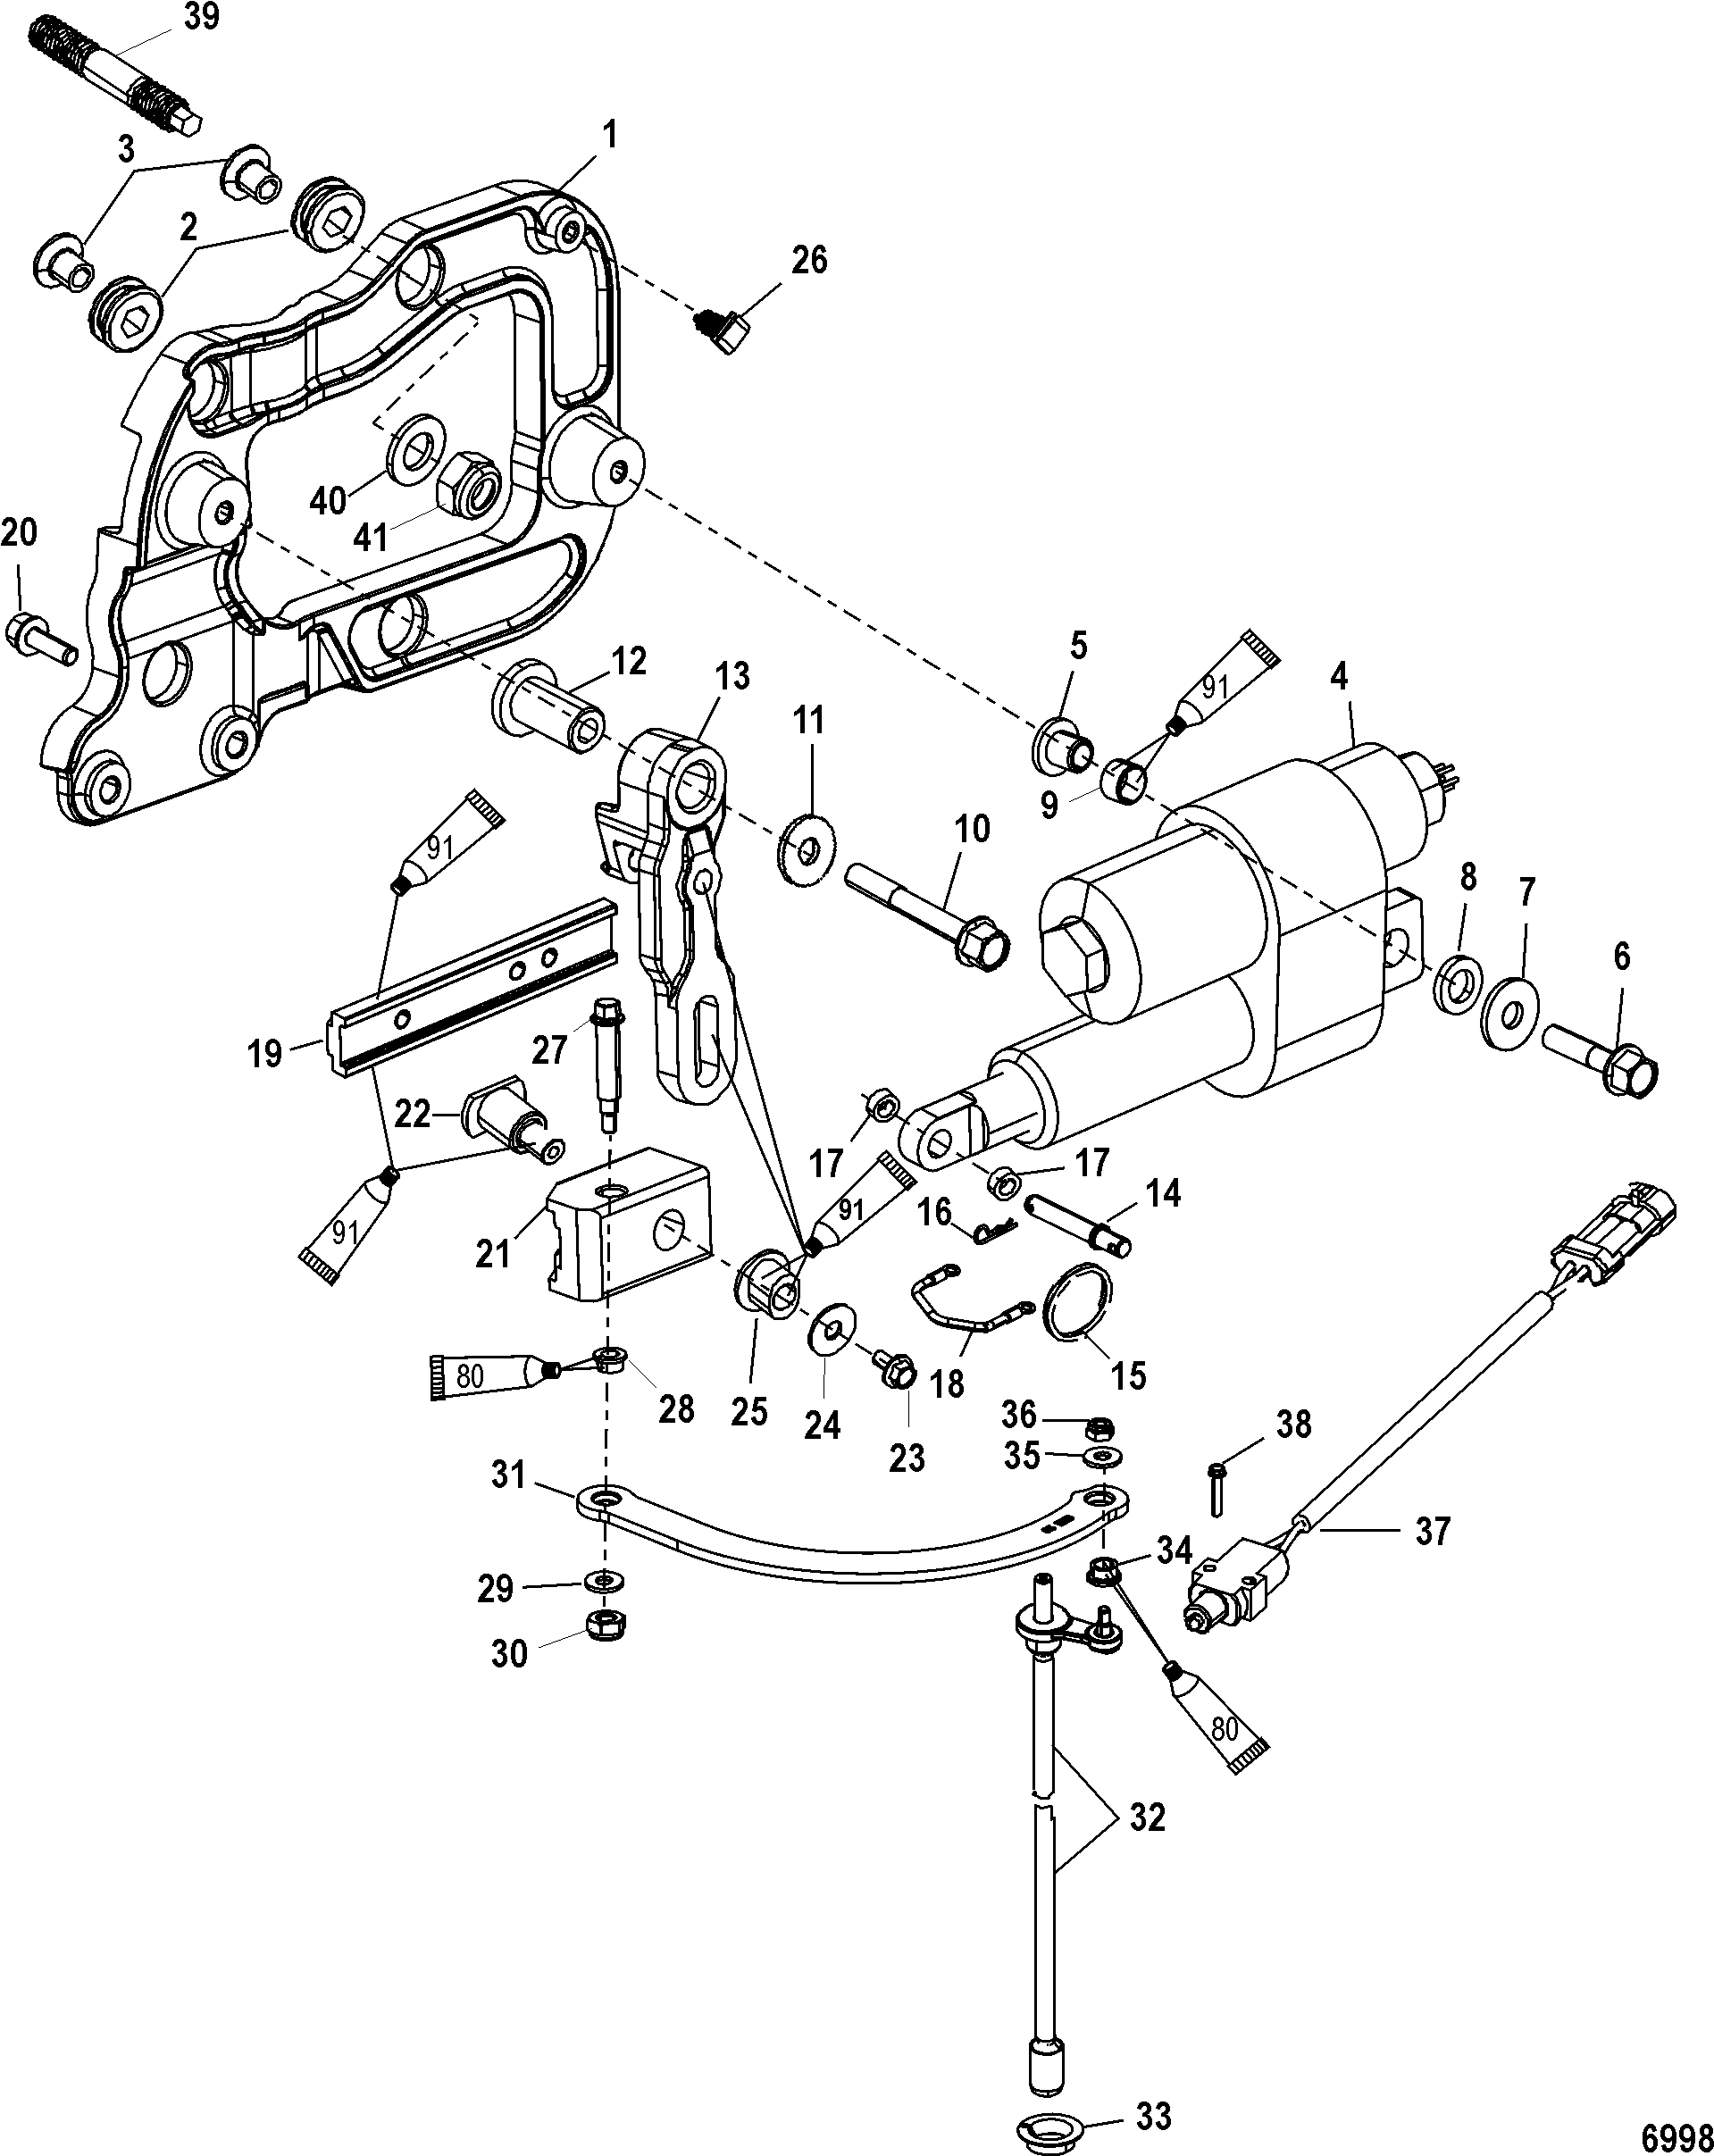 Shift Components(Serial Number 1B290522 and Below)